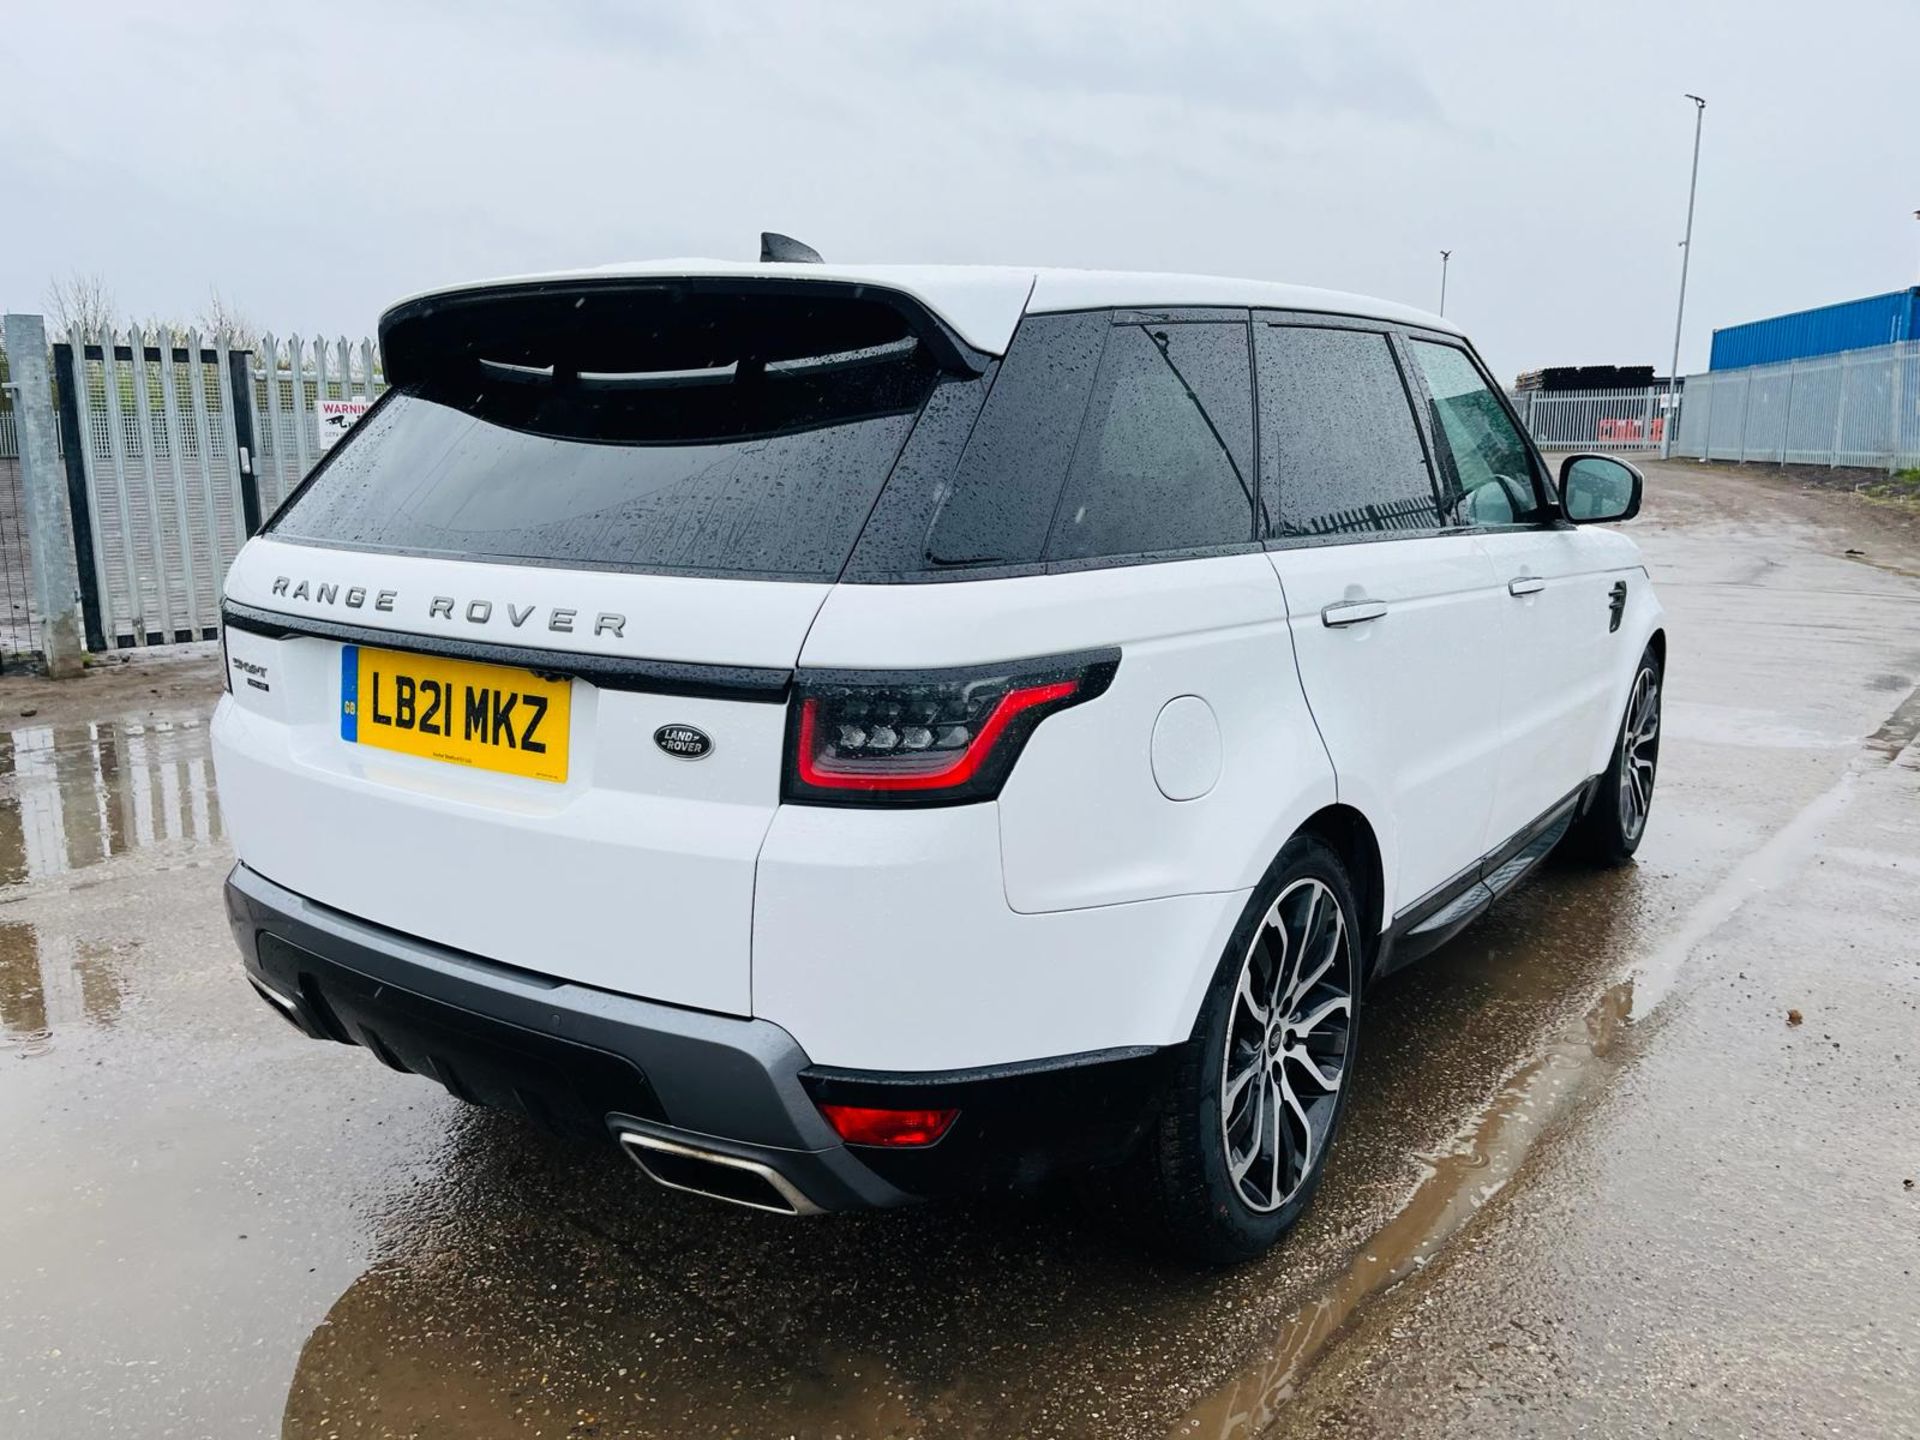 ** ON SALE ** Land Rover Range Rover Sport 2.0 P400E HSE Hybrid 2021 '21 Reg' -Panoramic Roof- - Image 9 of 38